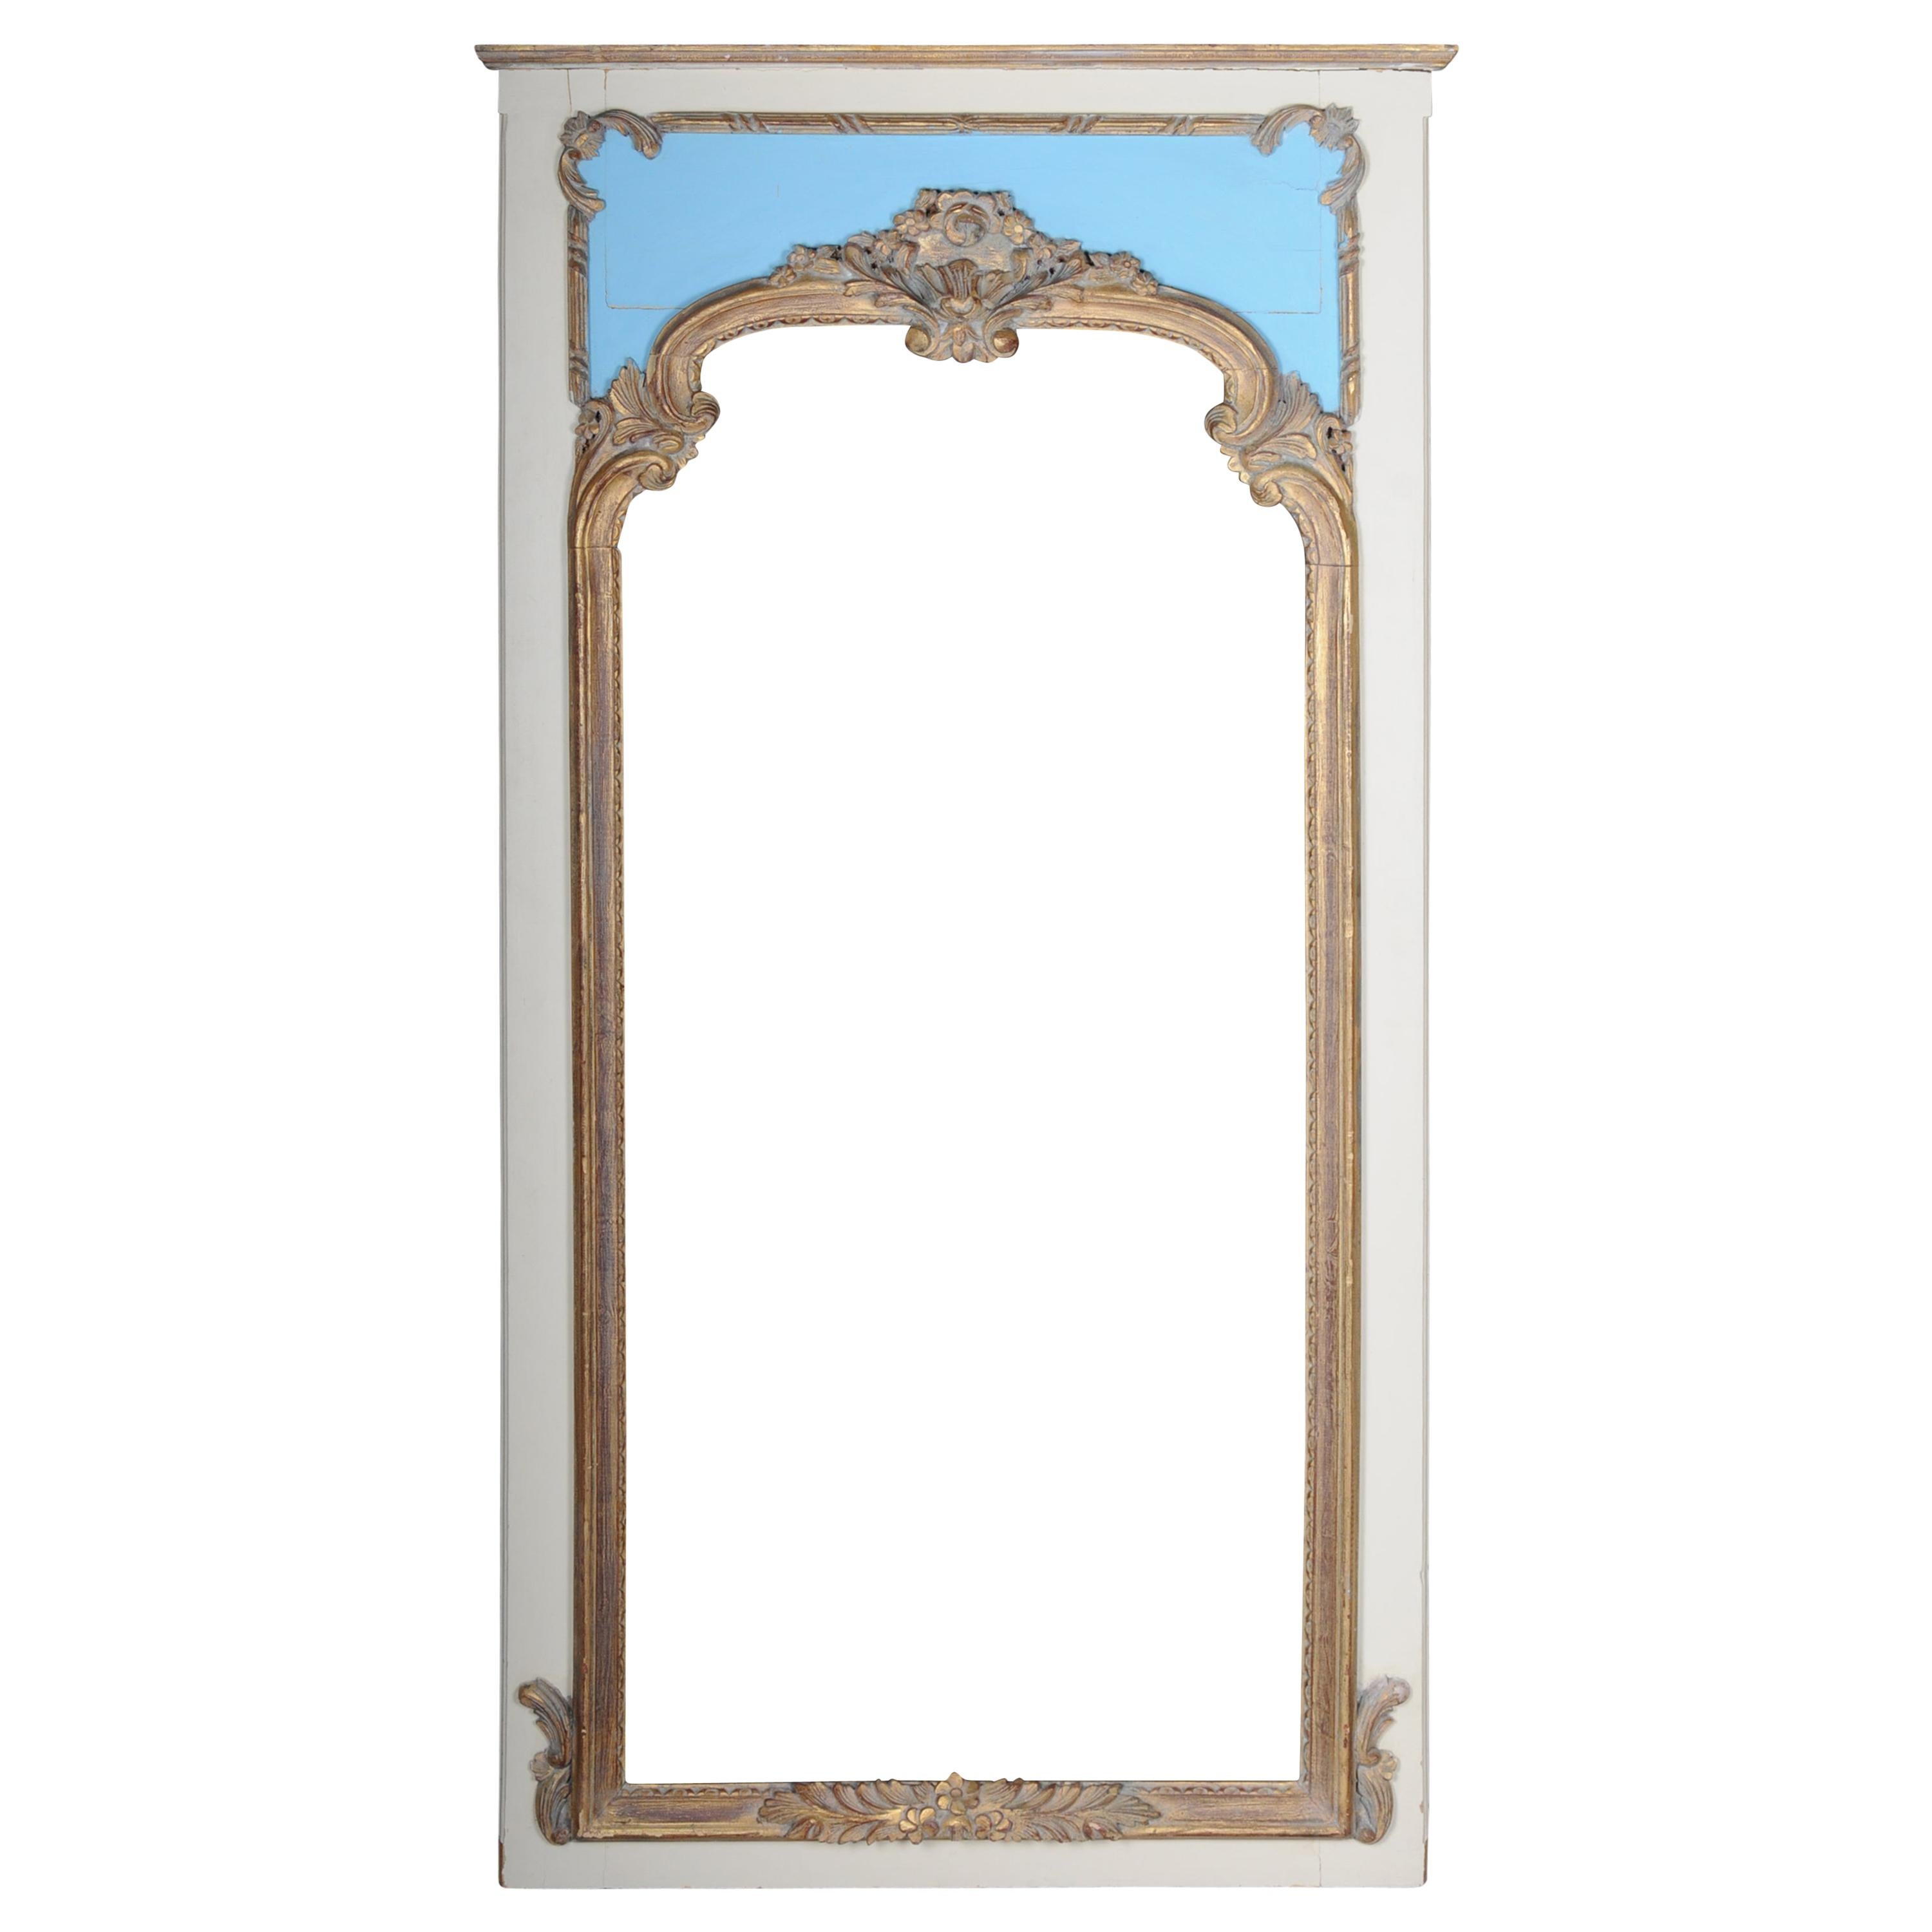 Large Baroque Salon Mirror in the Style of the 18th Century For Sale